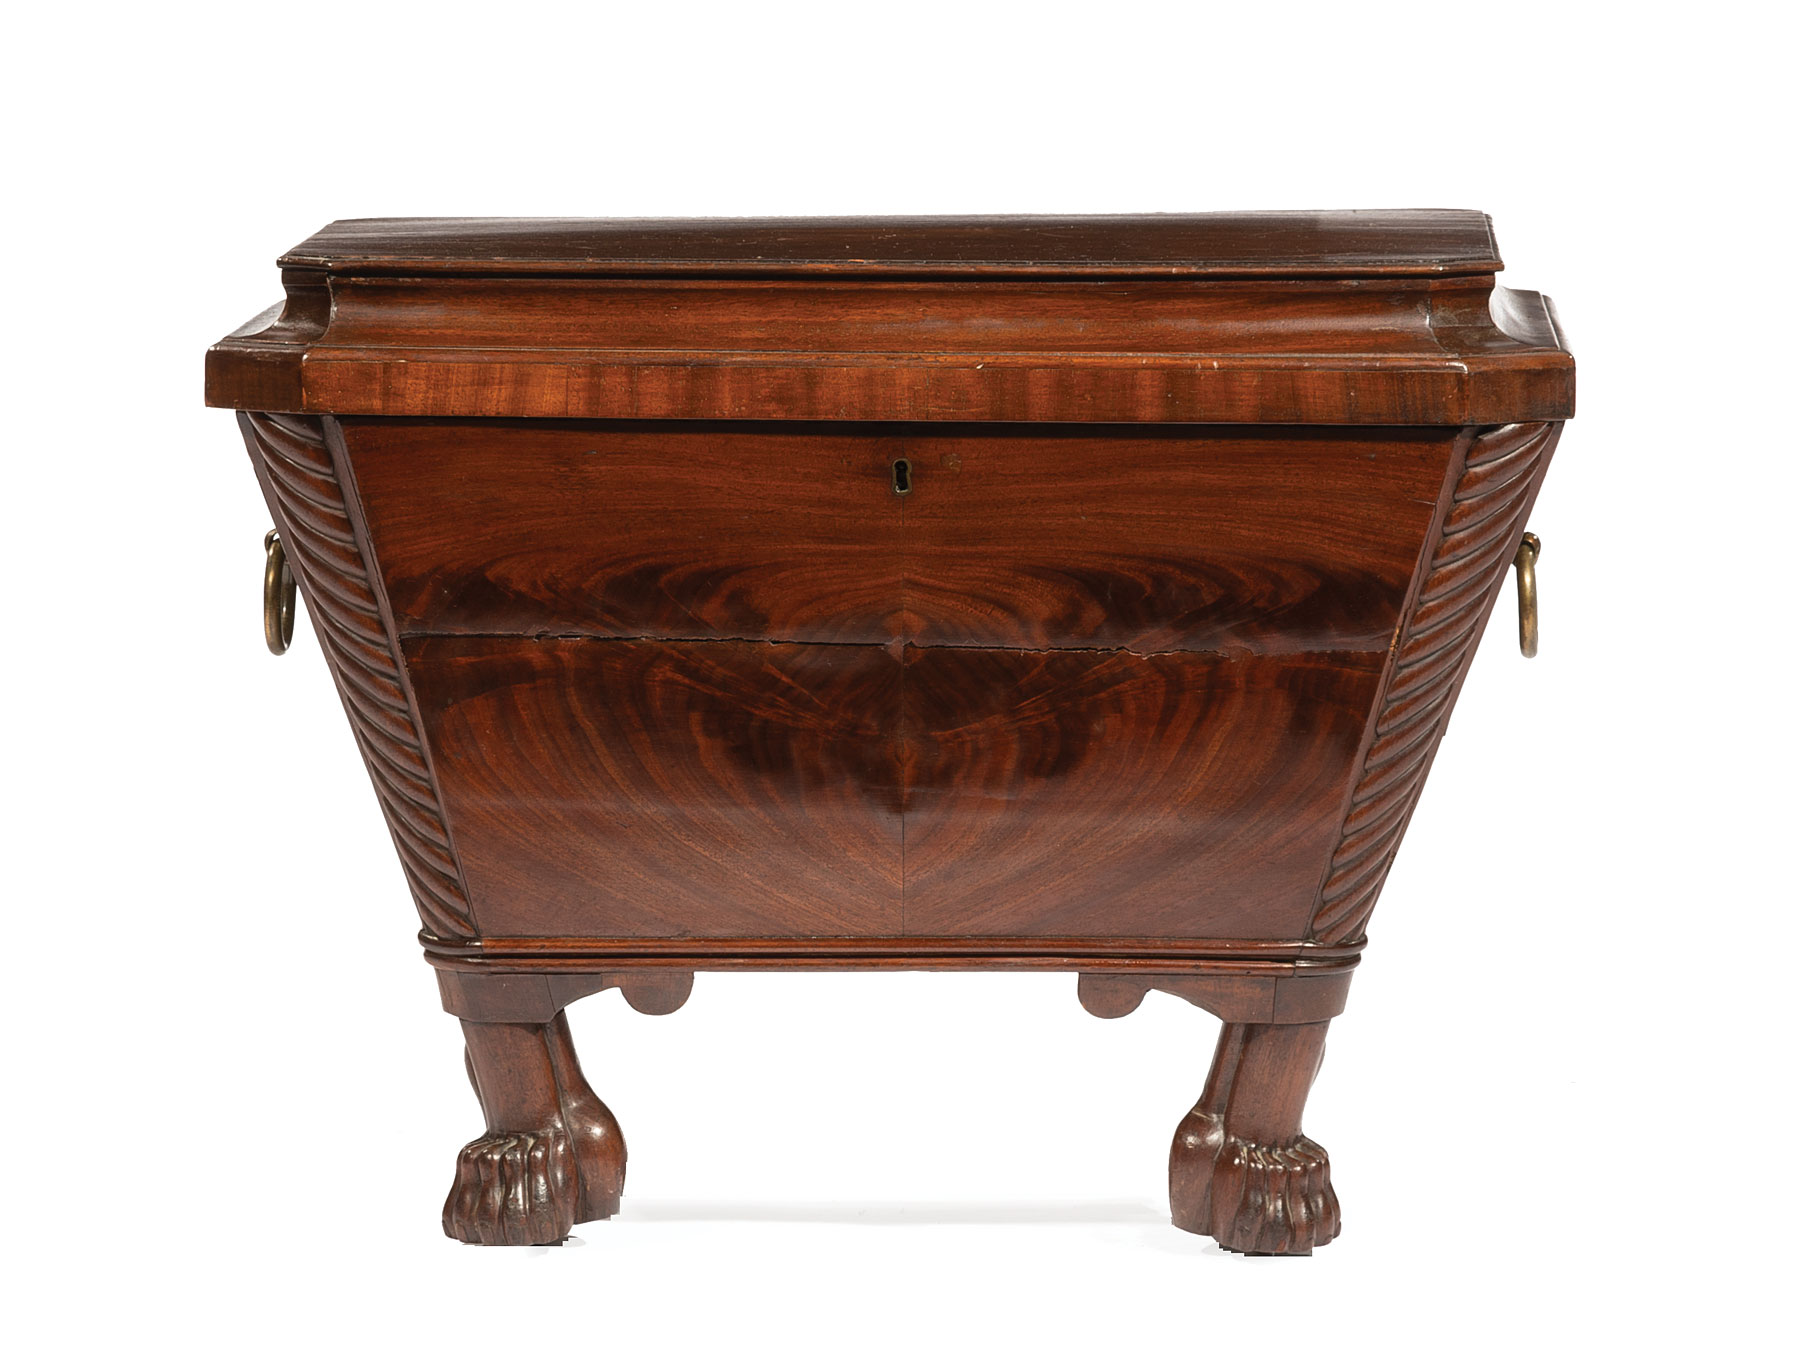 Regency Carved Mahogany Sarcophagus-Form Cellarette , c. 1820, rope-carved corners, brass ring - Image 2 of 3